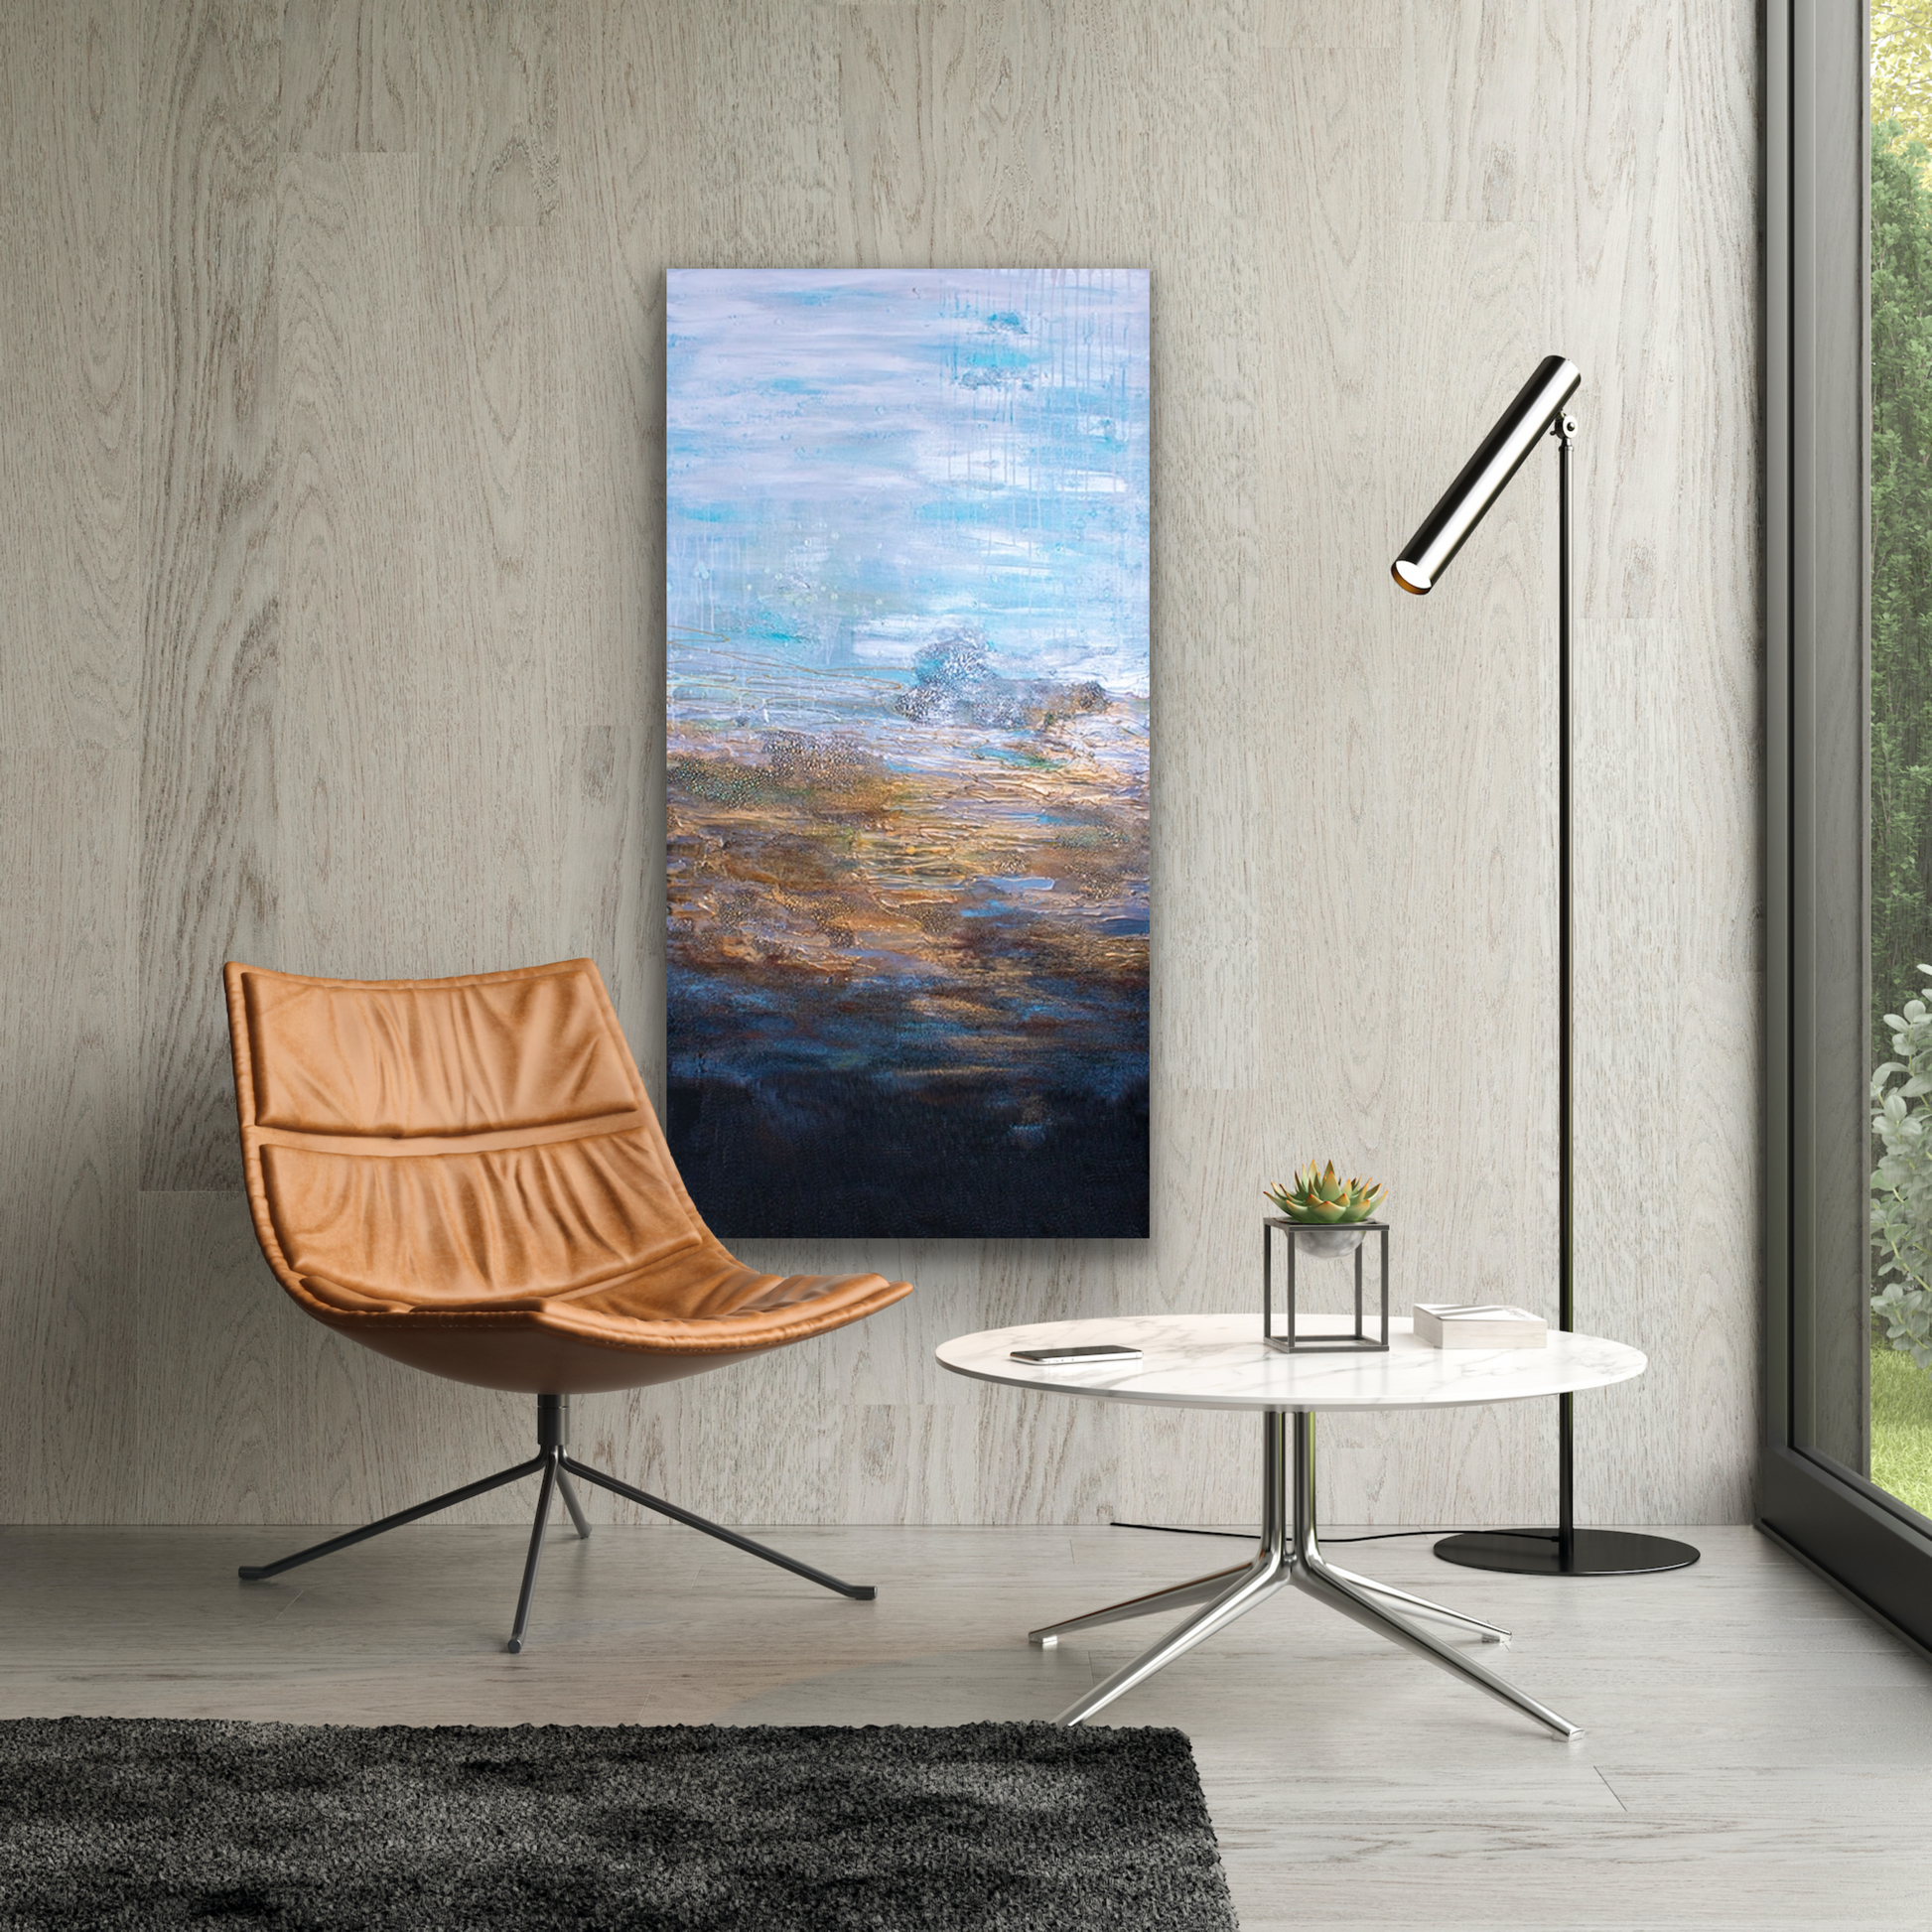 Just imagine this stunning abstract painting hanging within your home or office space.